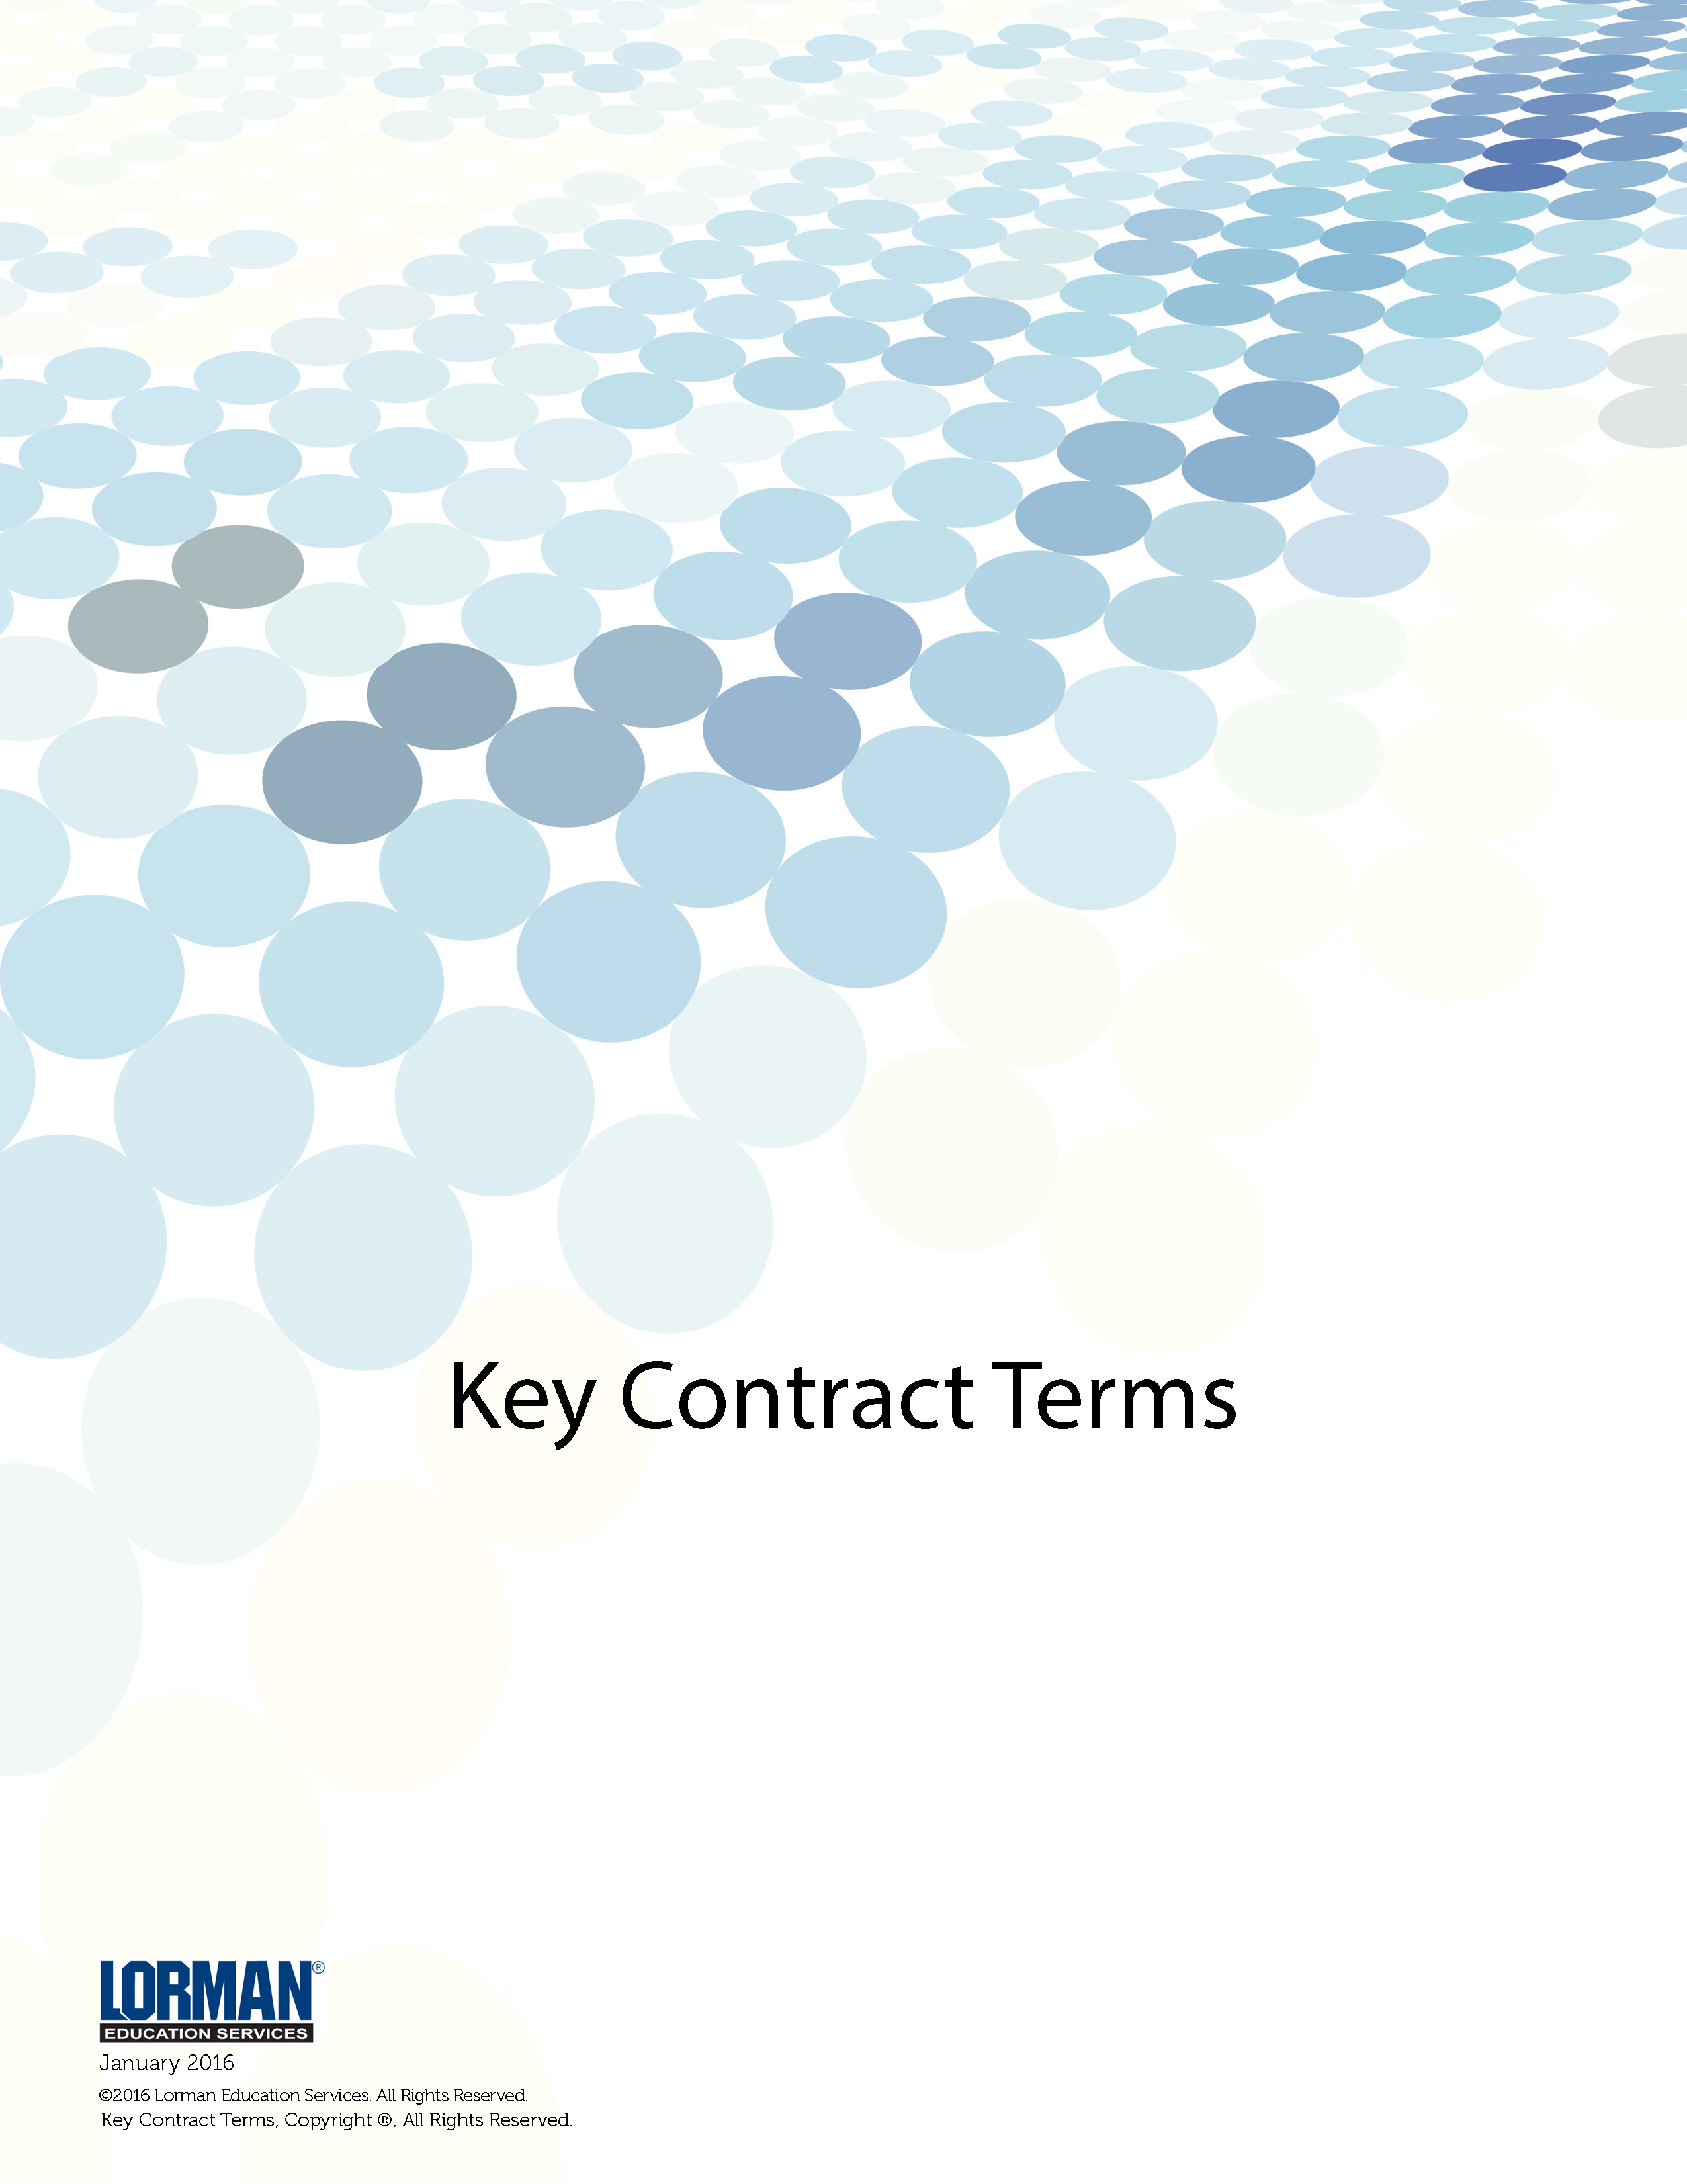 Key Construction Contract Terms